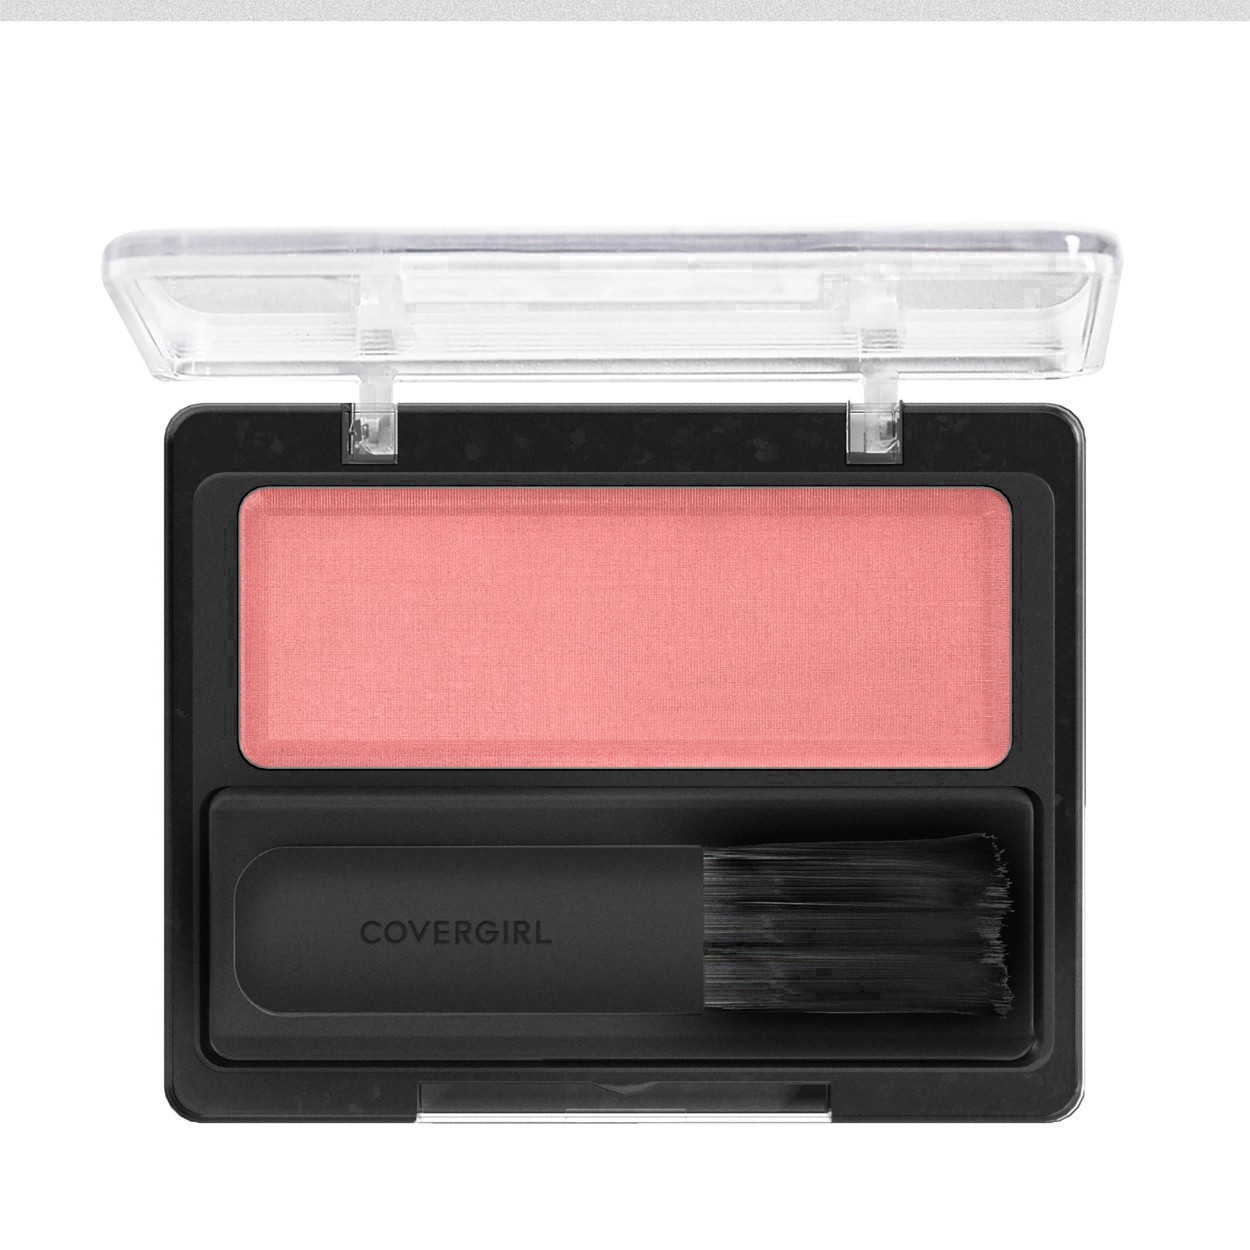 slide 19 of 42, COTY COVERGIRL COVERGIRL Classic Color Blush Rose Silk, 1 ct